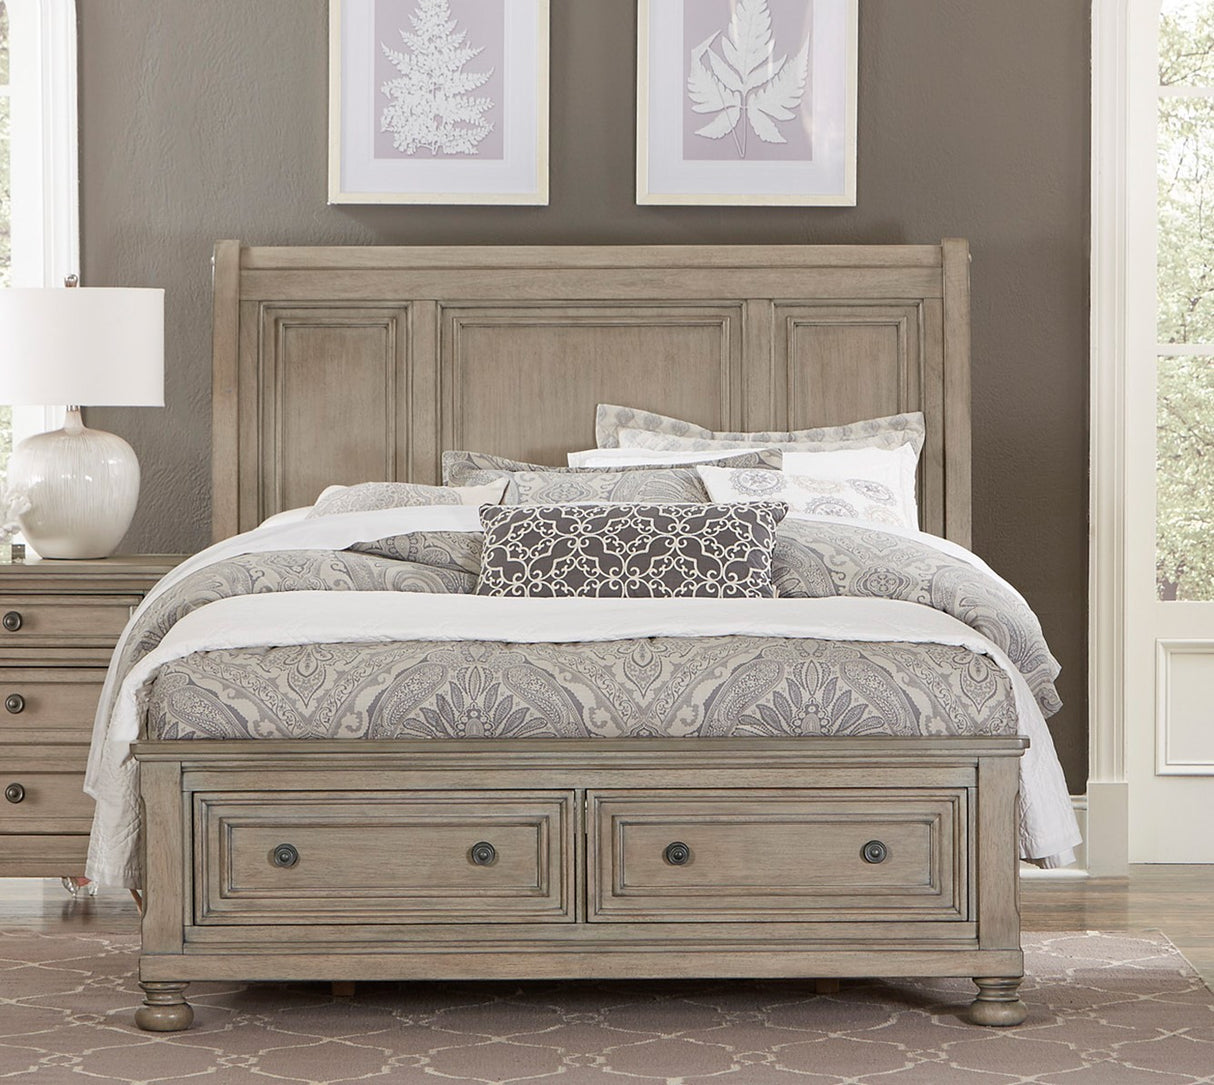 Classic Style Queen Size Sleigh Bed 1pc with Footboard Storage Drawers Wire Brushed Gray Finish Wooden Furniture - Home Elegance USA